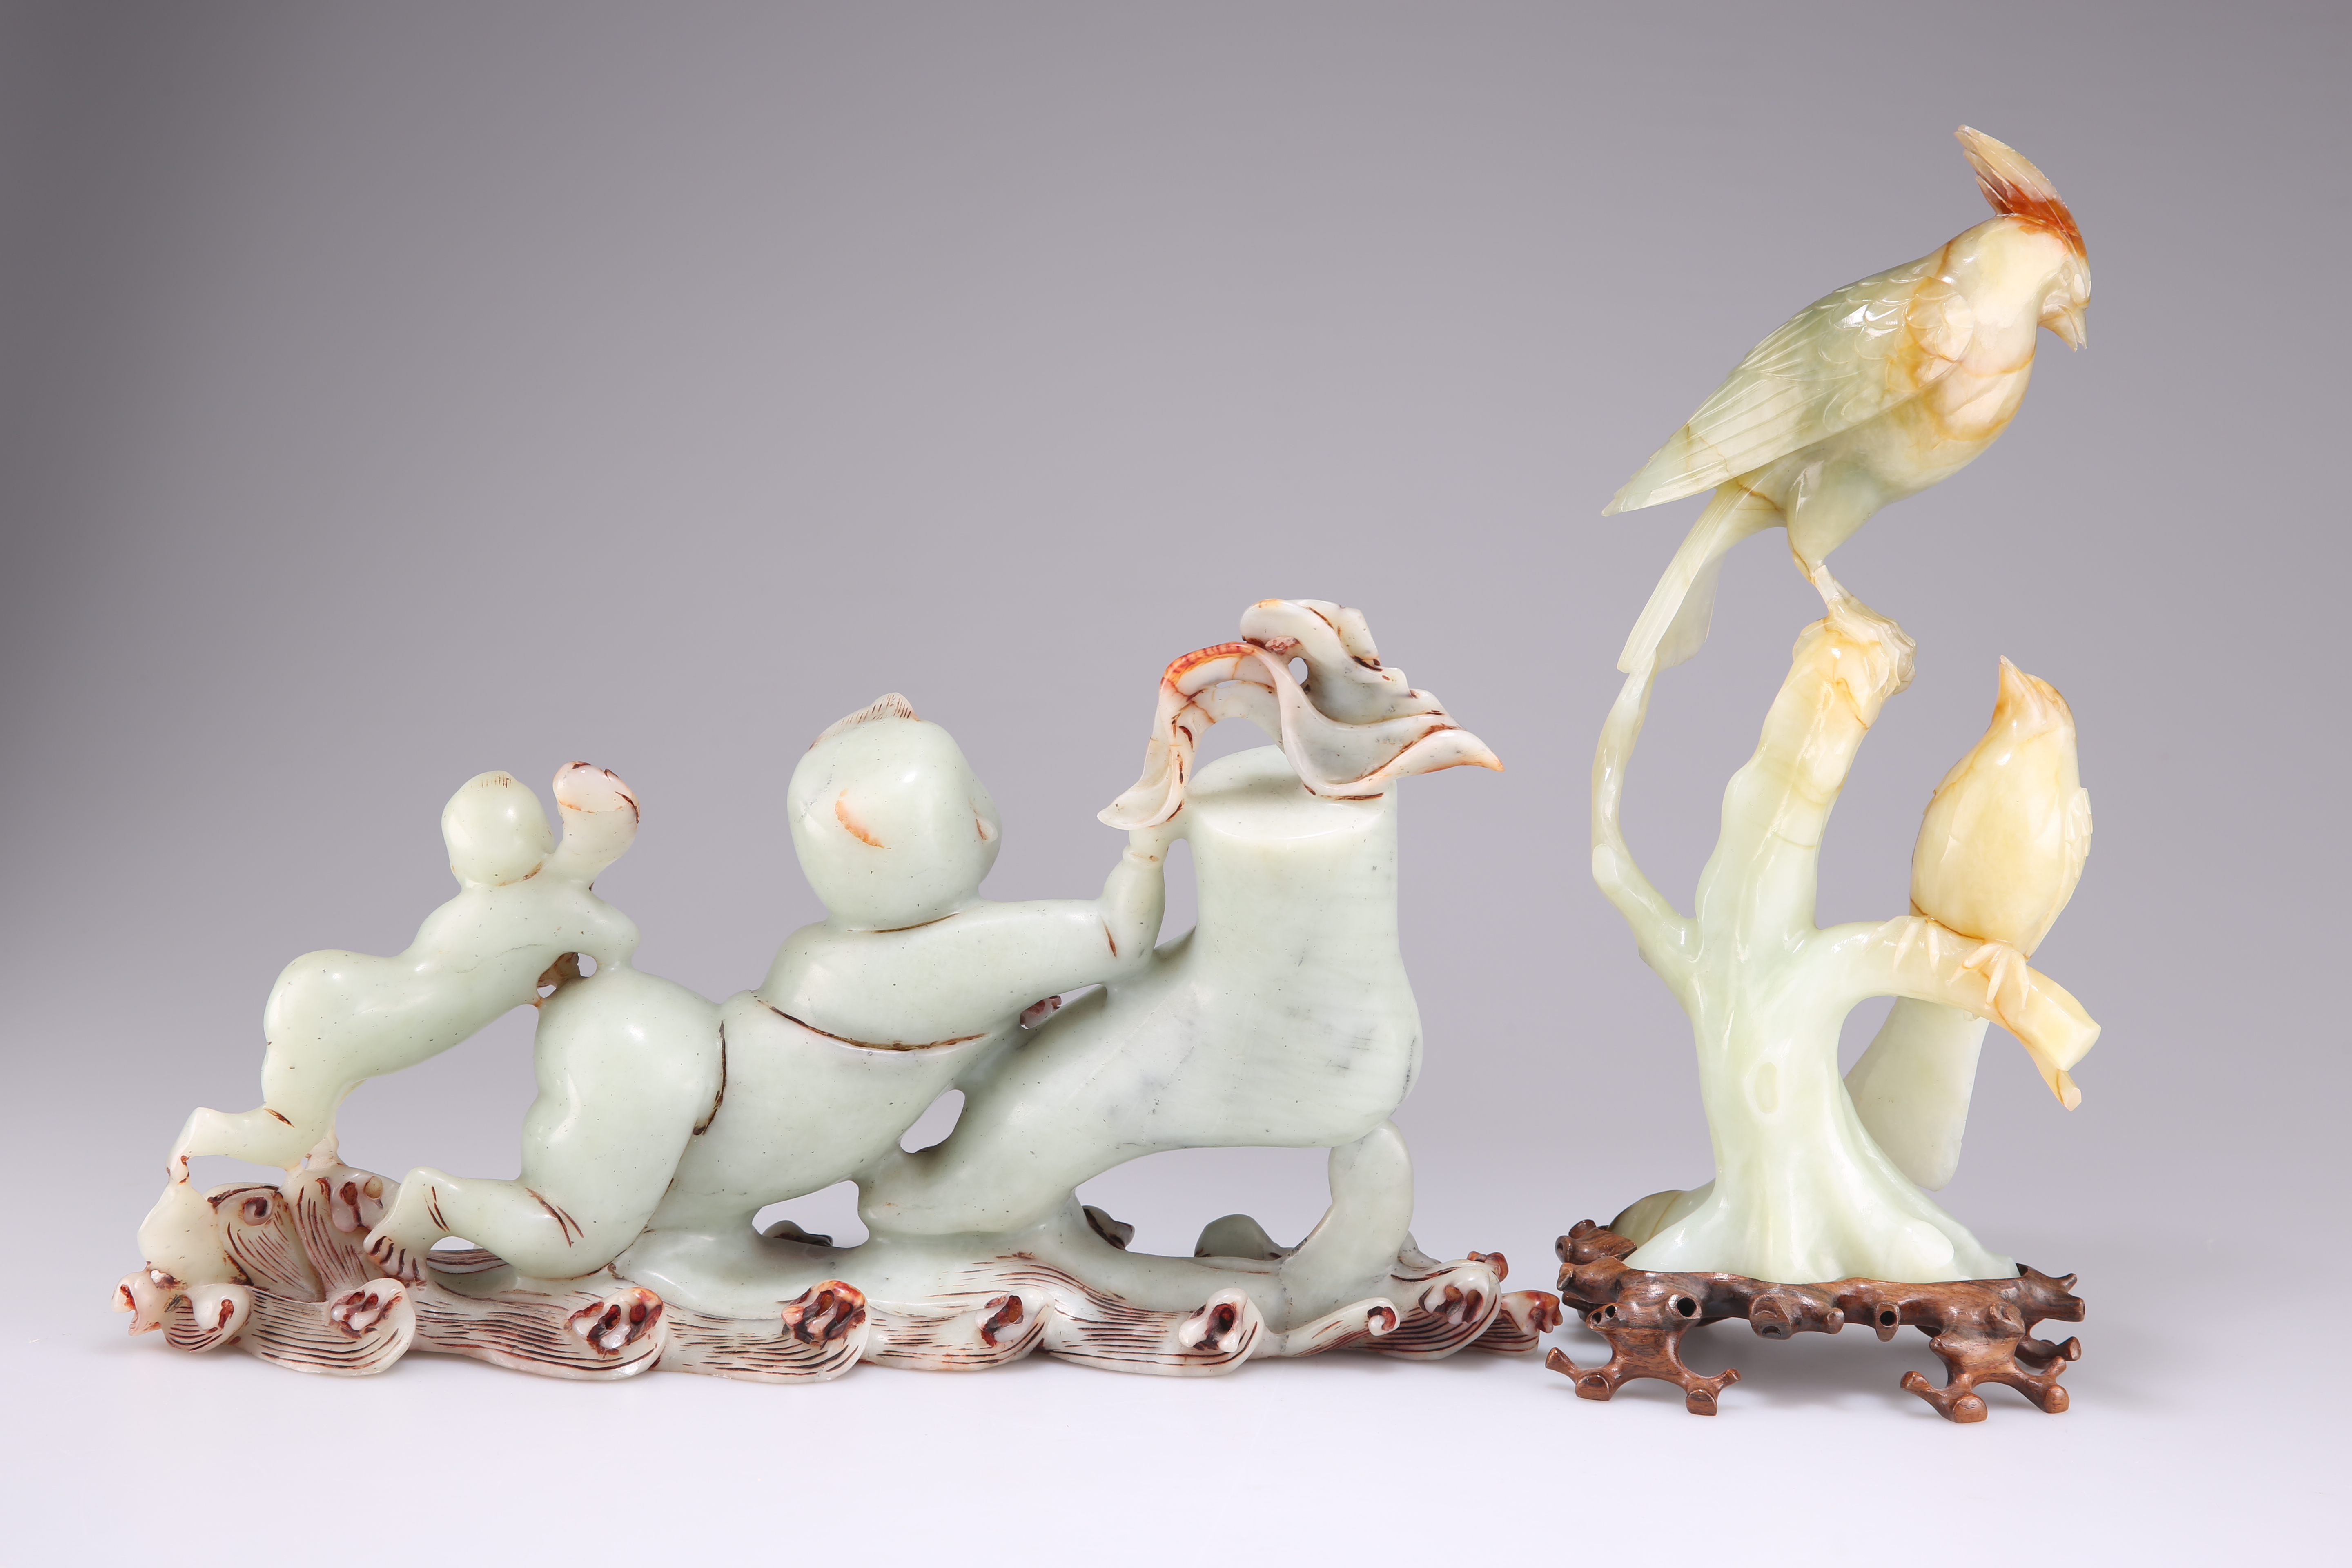 A CHINESE LARGE JADE CARVING, AND A JADE CARVING OF BIRDS - Image 2 of 2